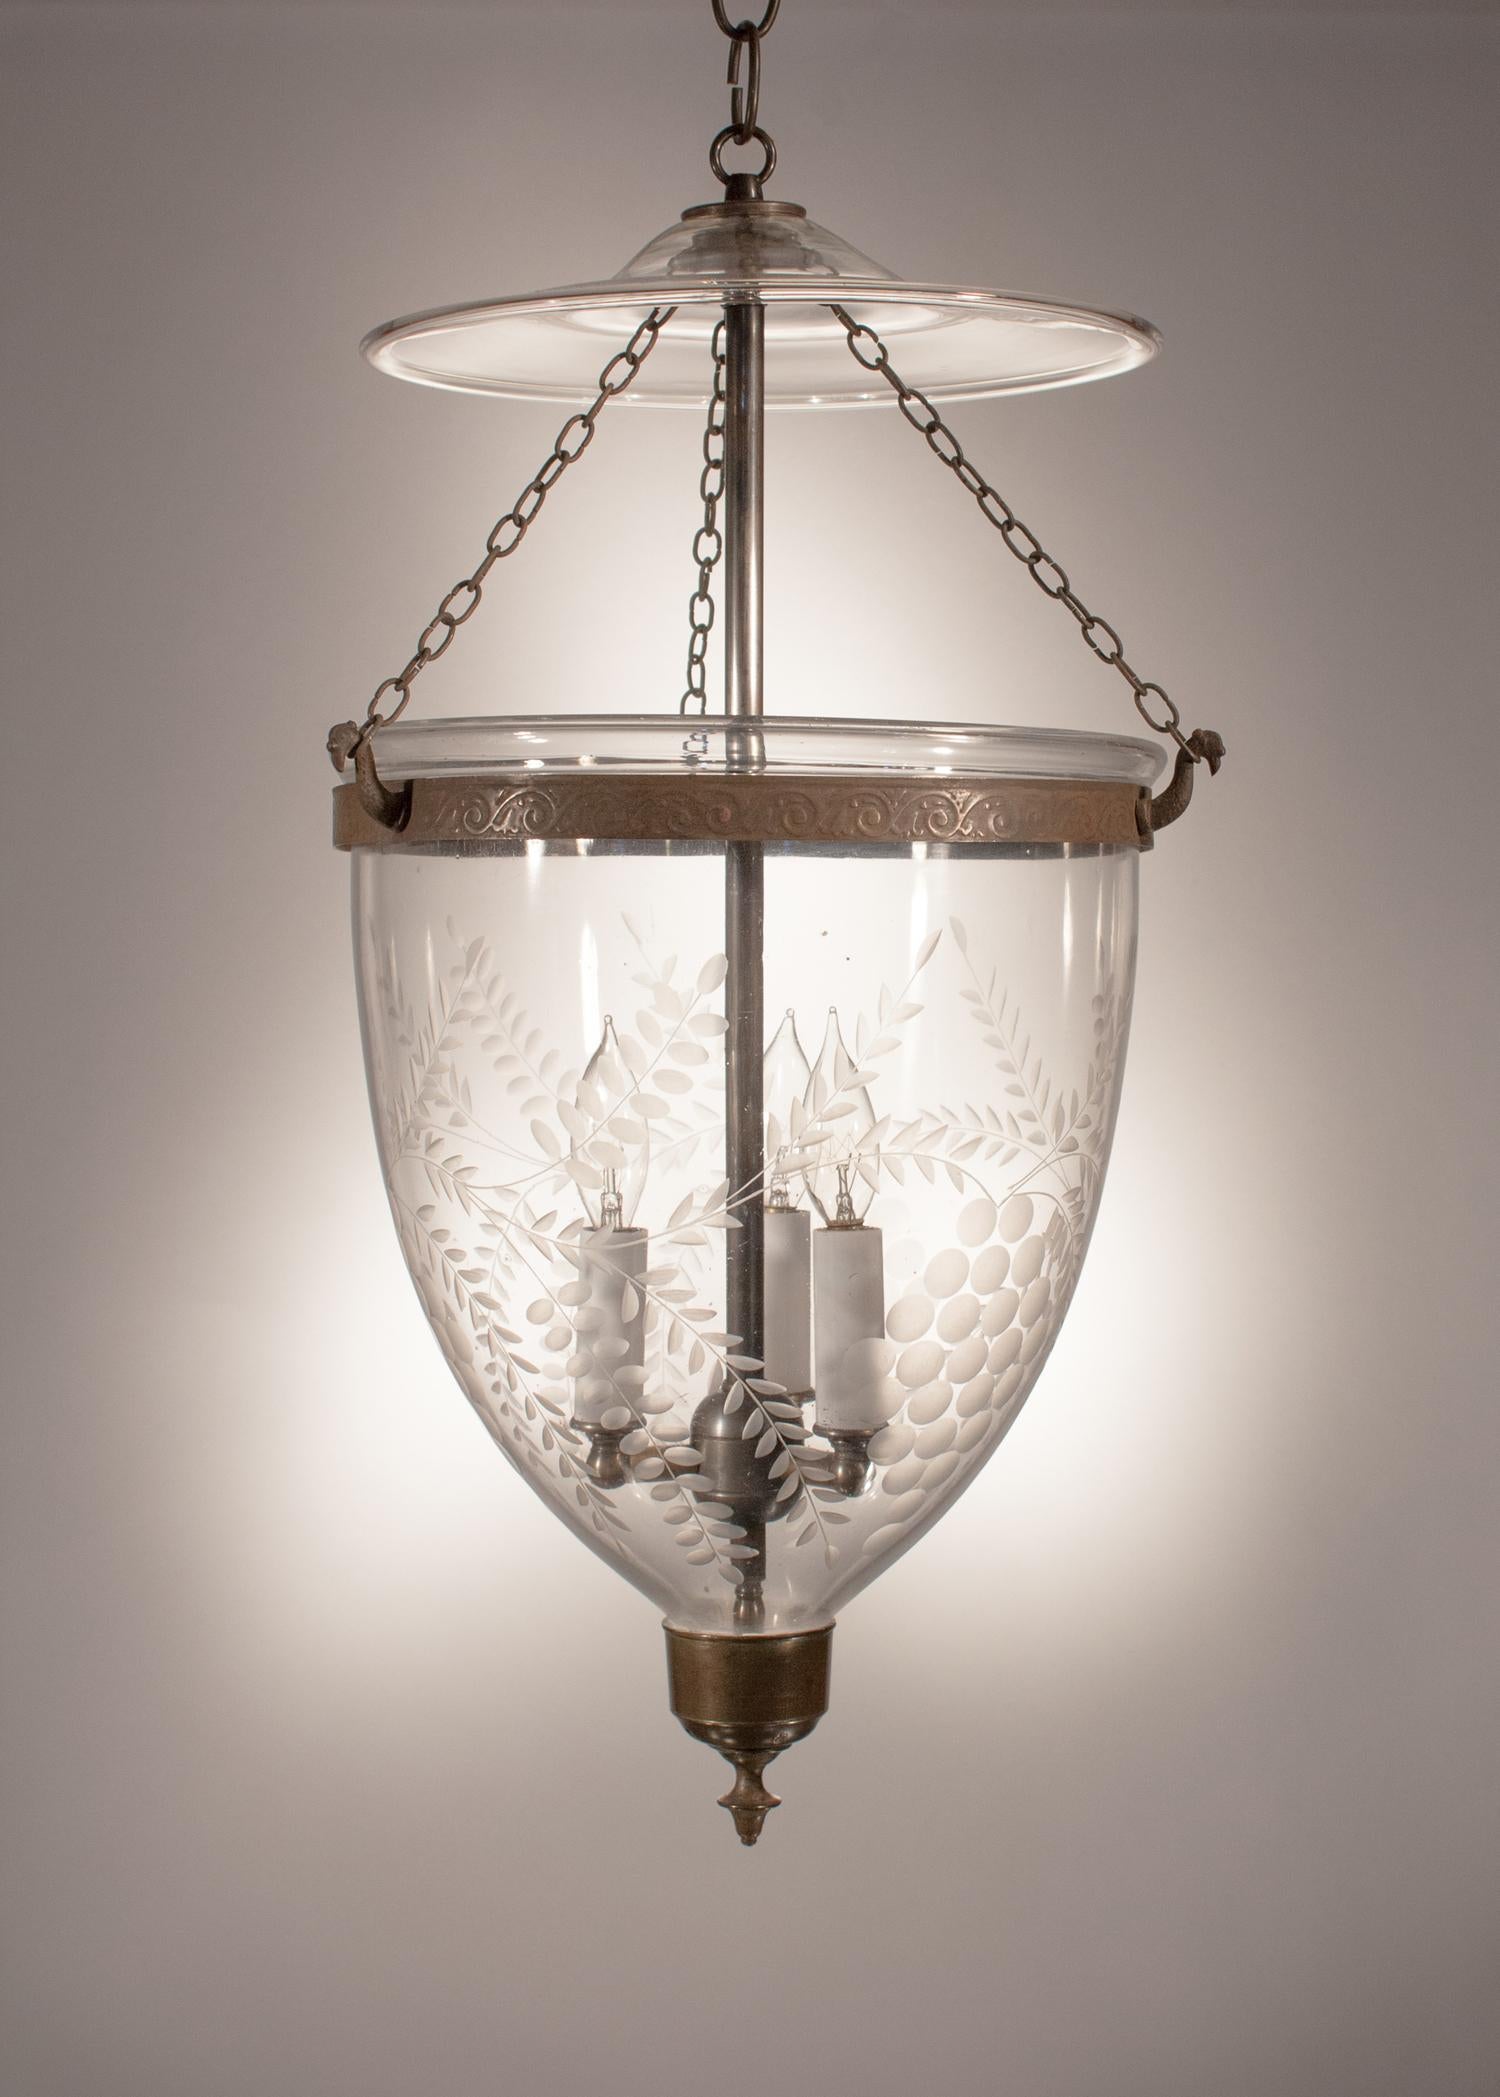 An antique English hand blown glass bell jar lantern with lovely form and a complementary etched grape motif. This circa 1870 bell jar pendant has its original glass smoke bell/lid and brass finial. The embossed brass band and chains have been